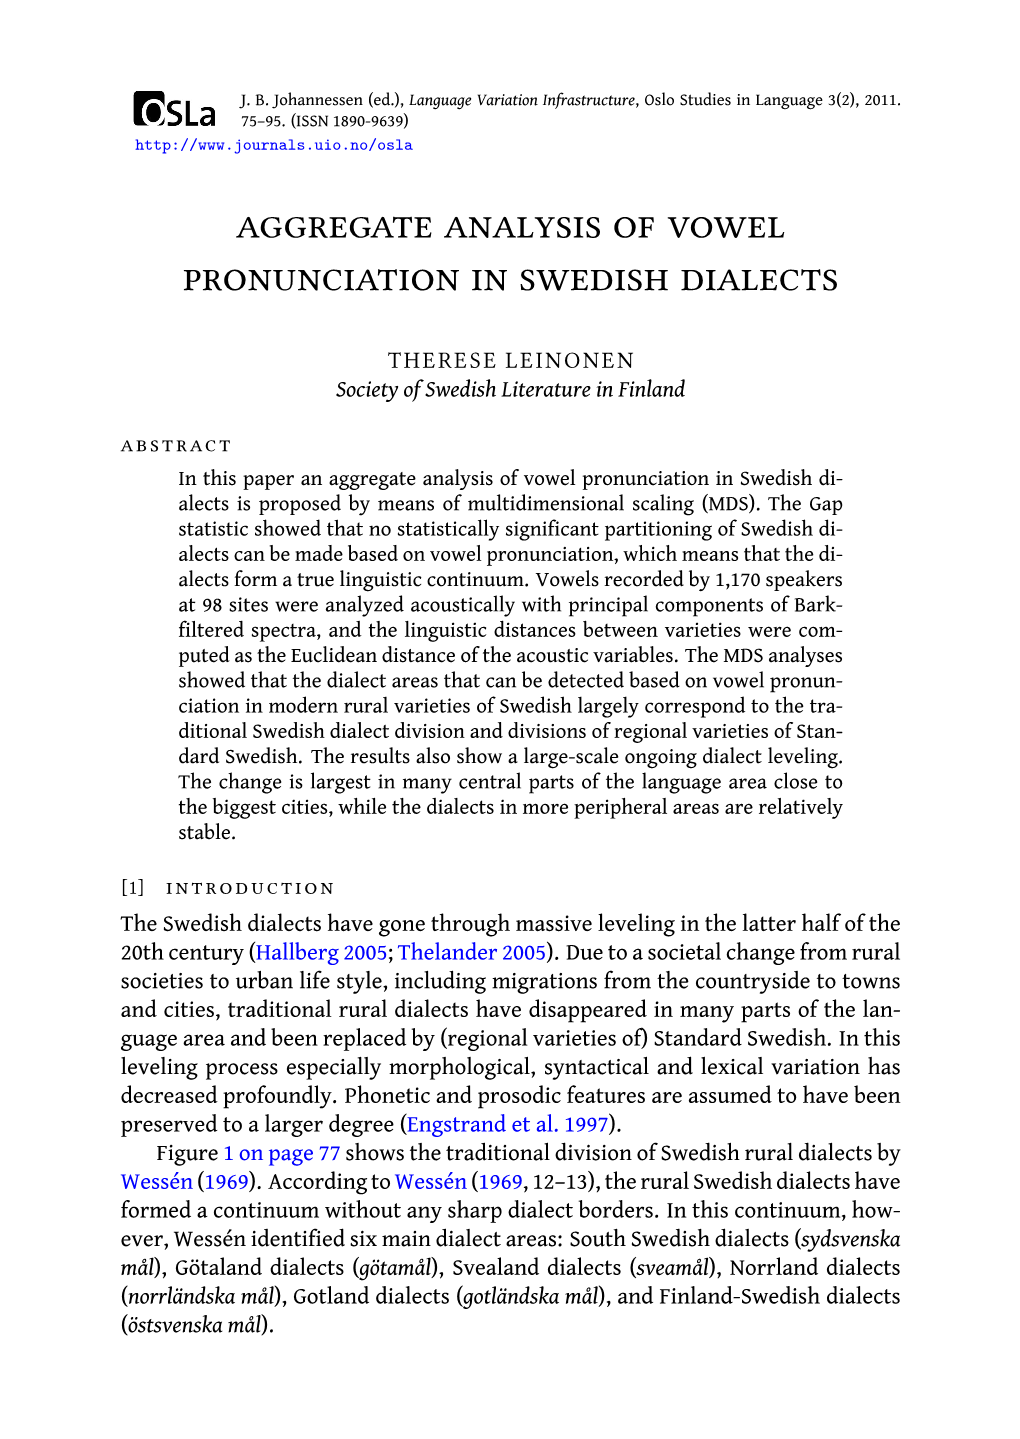 Aggregate Analysis of Vowel Pronunciation in Swedish Dialects